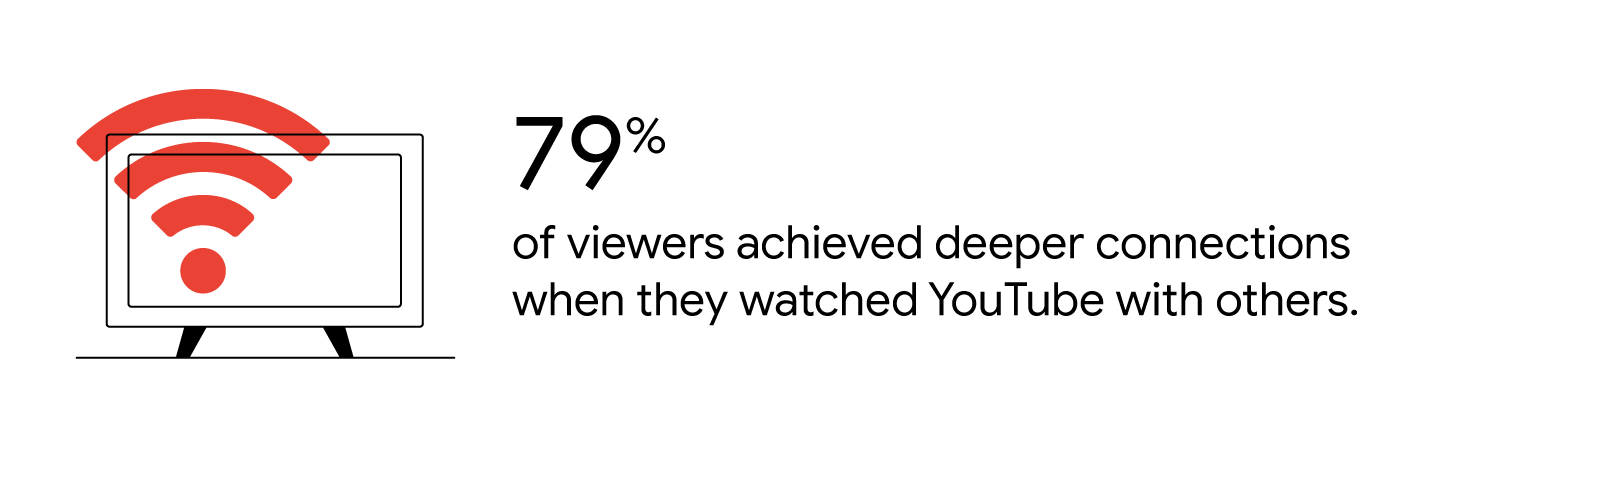 A Wi-Fi-enabled smart TV. 79% of viewers achieved deeper connections when they watched YouTube with others.